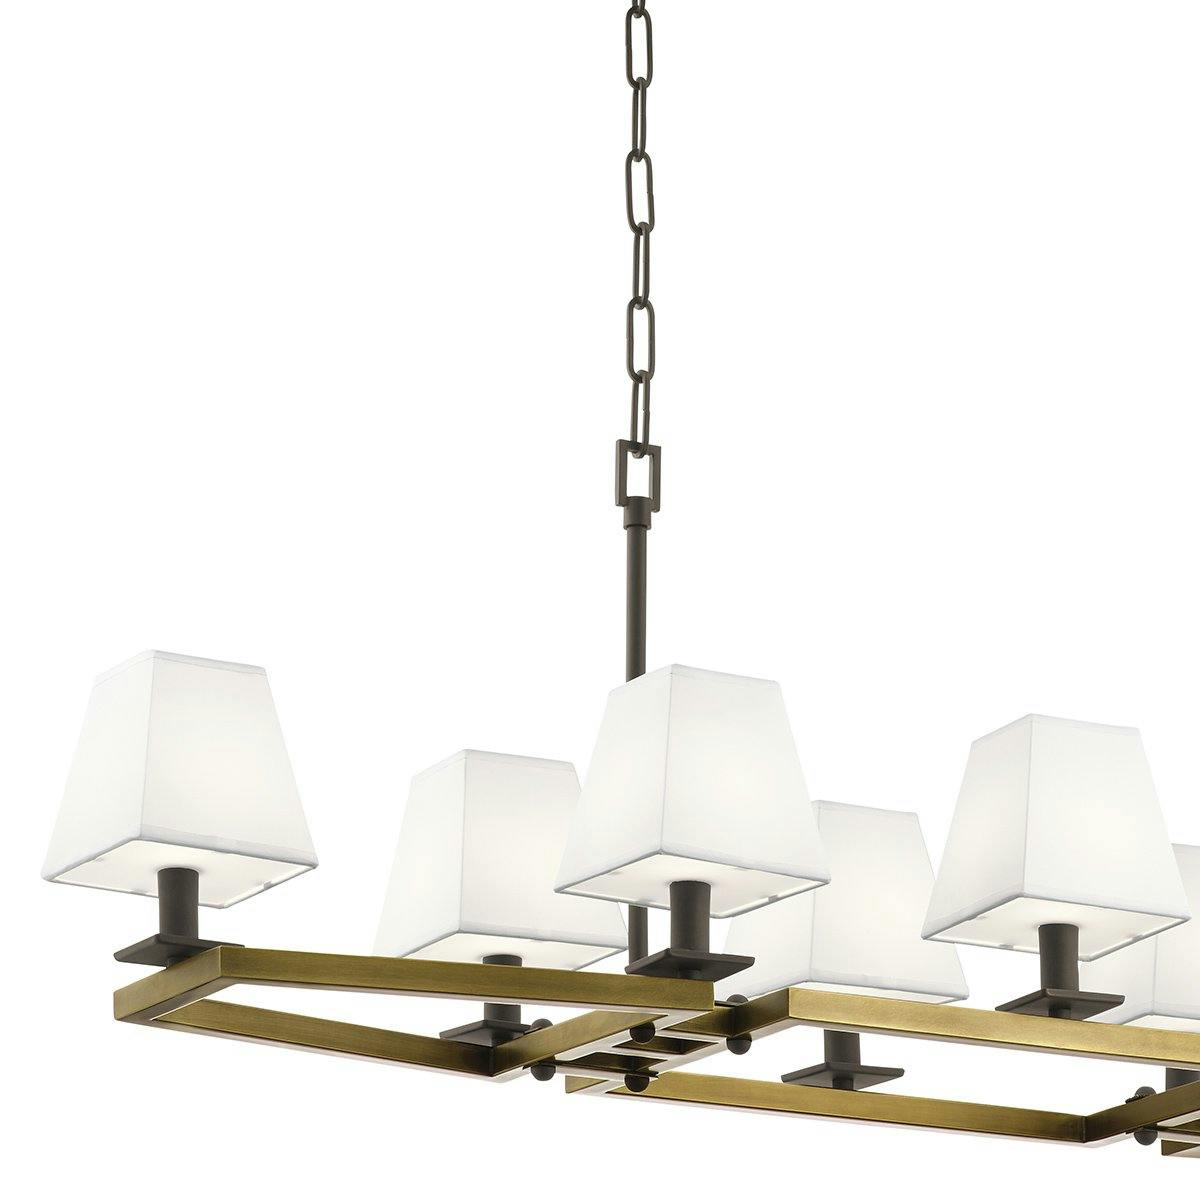 Close up view of the Dancar 48" Linear Chandelier Brass on a white background